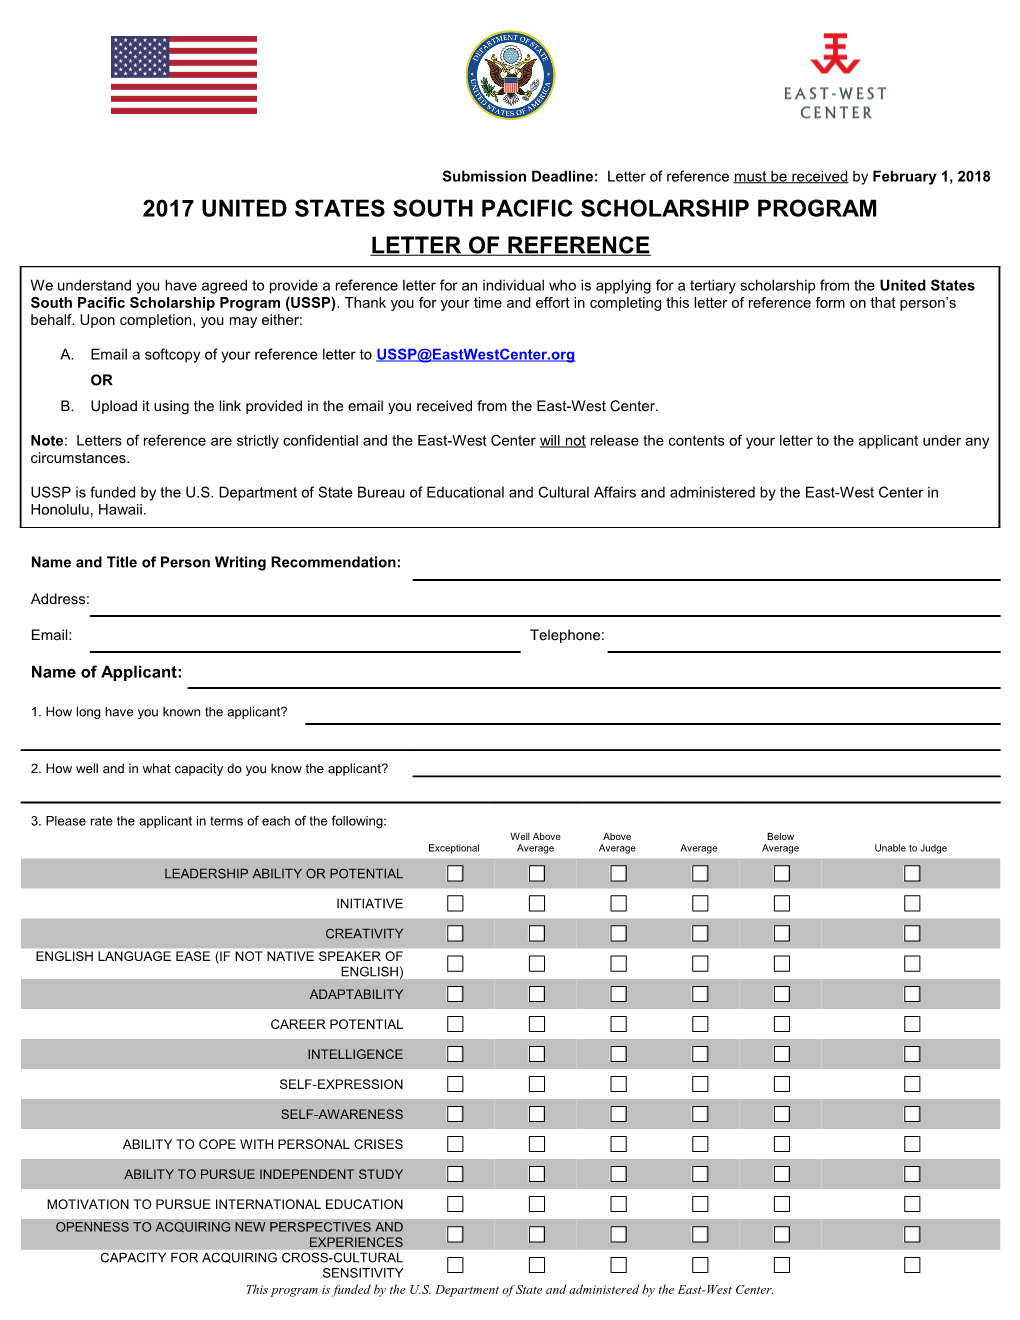 United States South Pacific Scholarship Program Letter of Reference